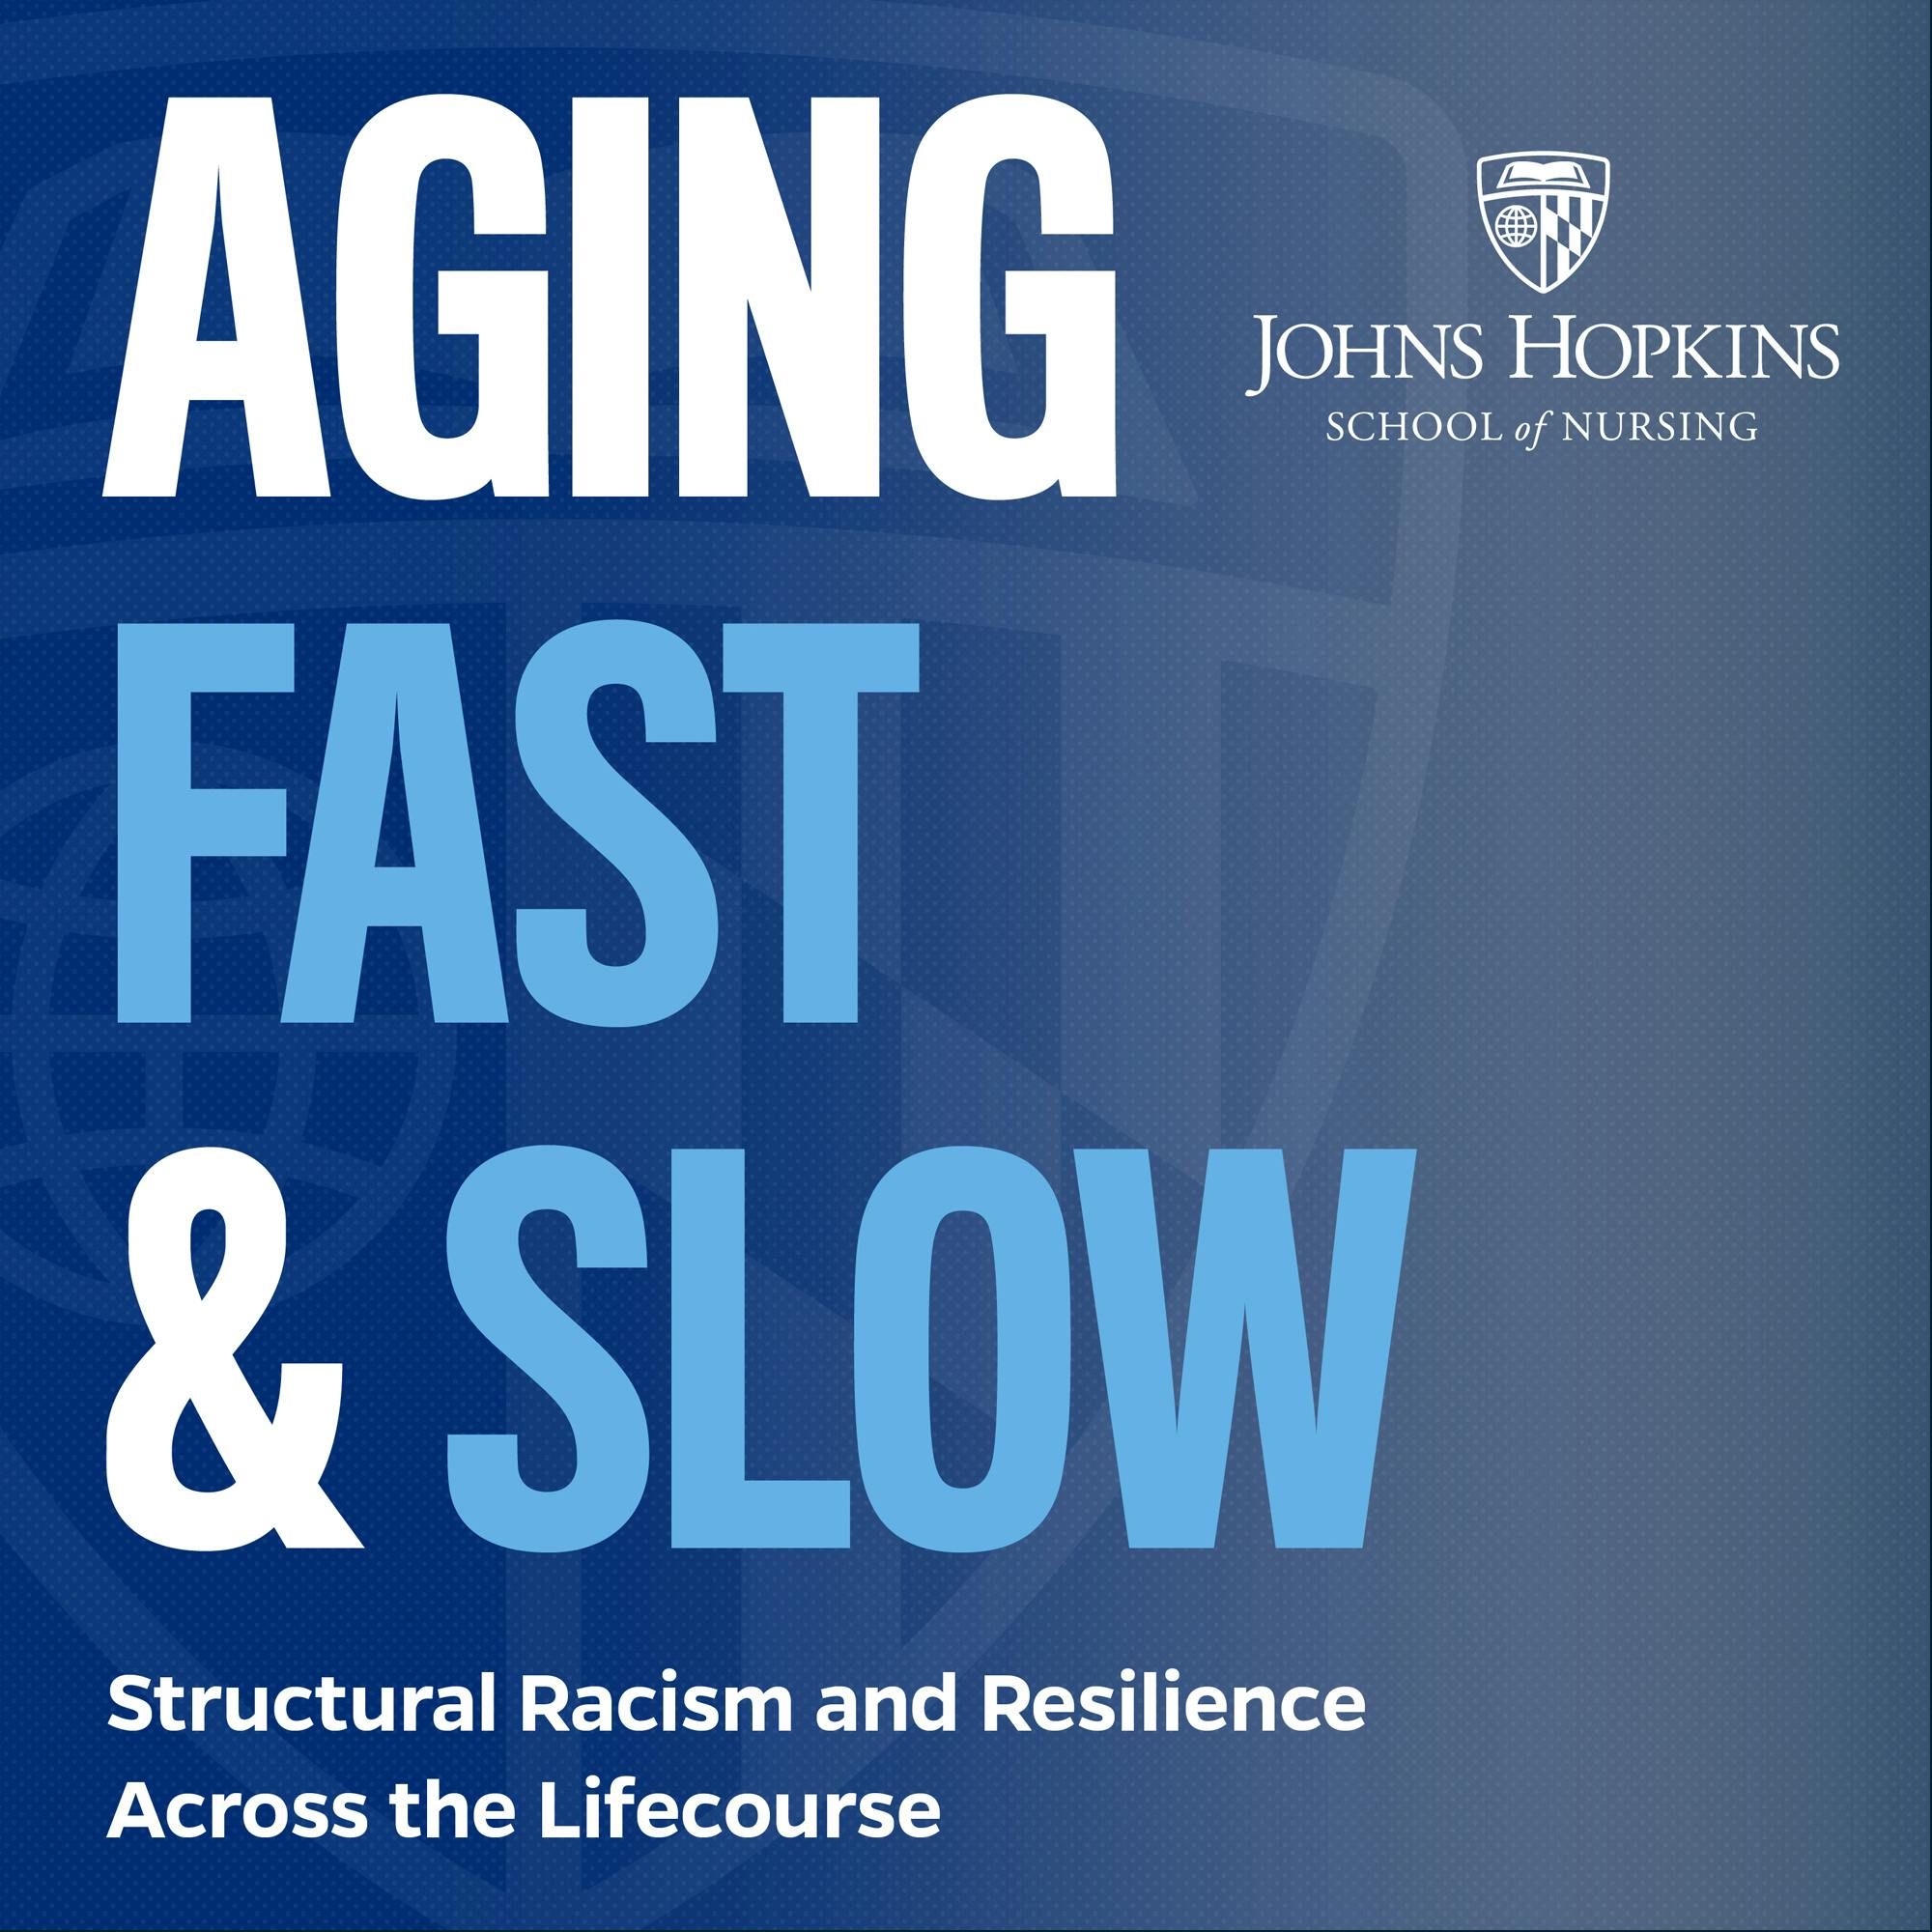 Aging Fast & Slow: Reshaping Systems of Discrimination